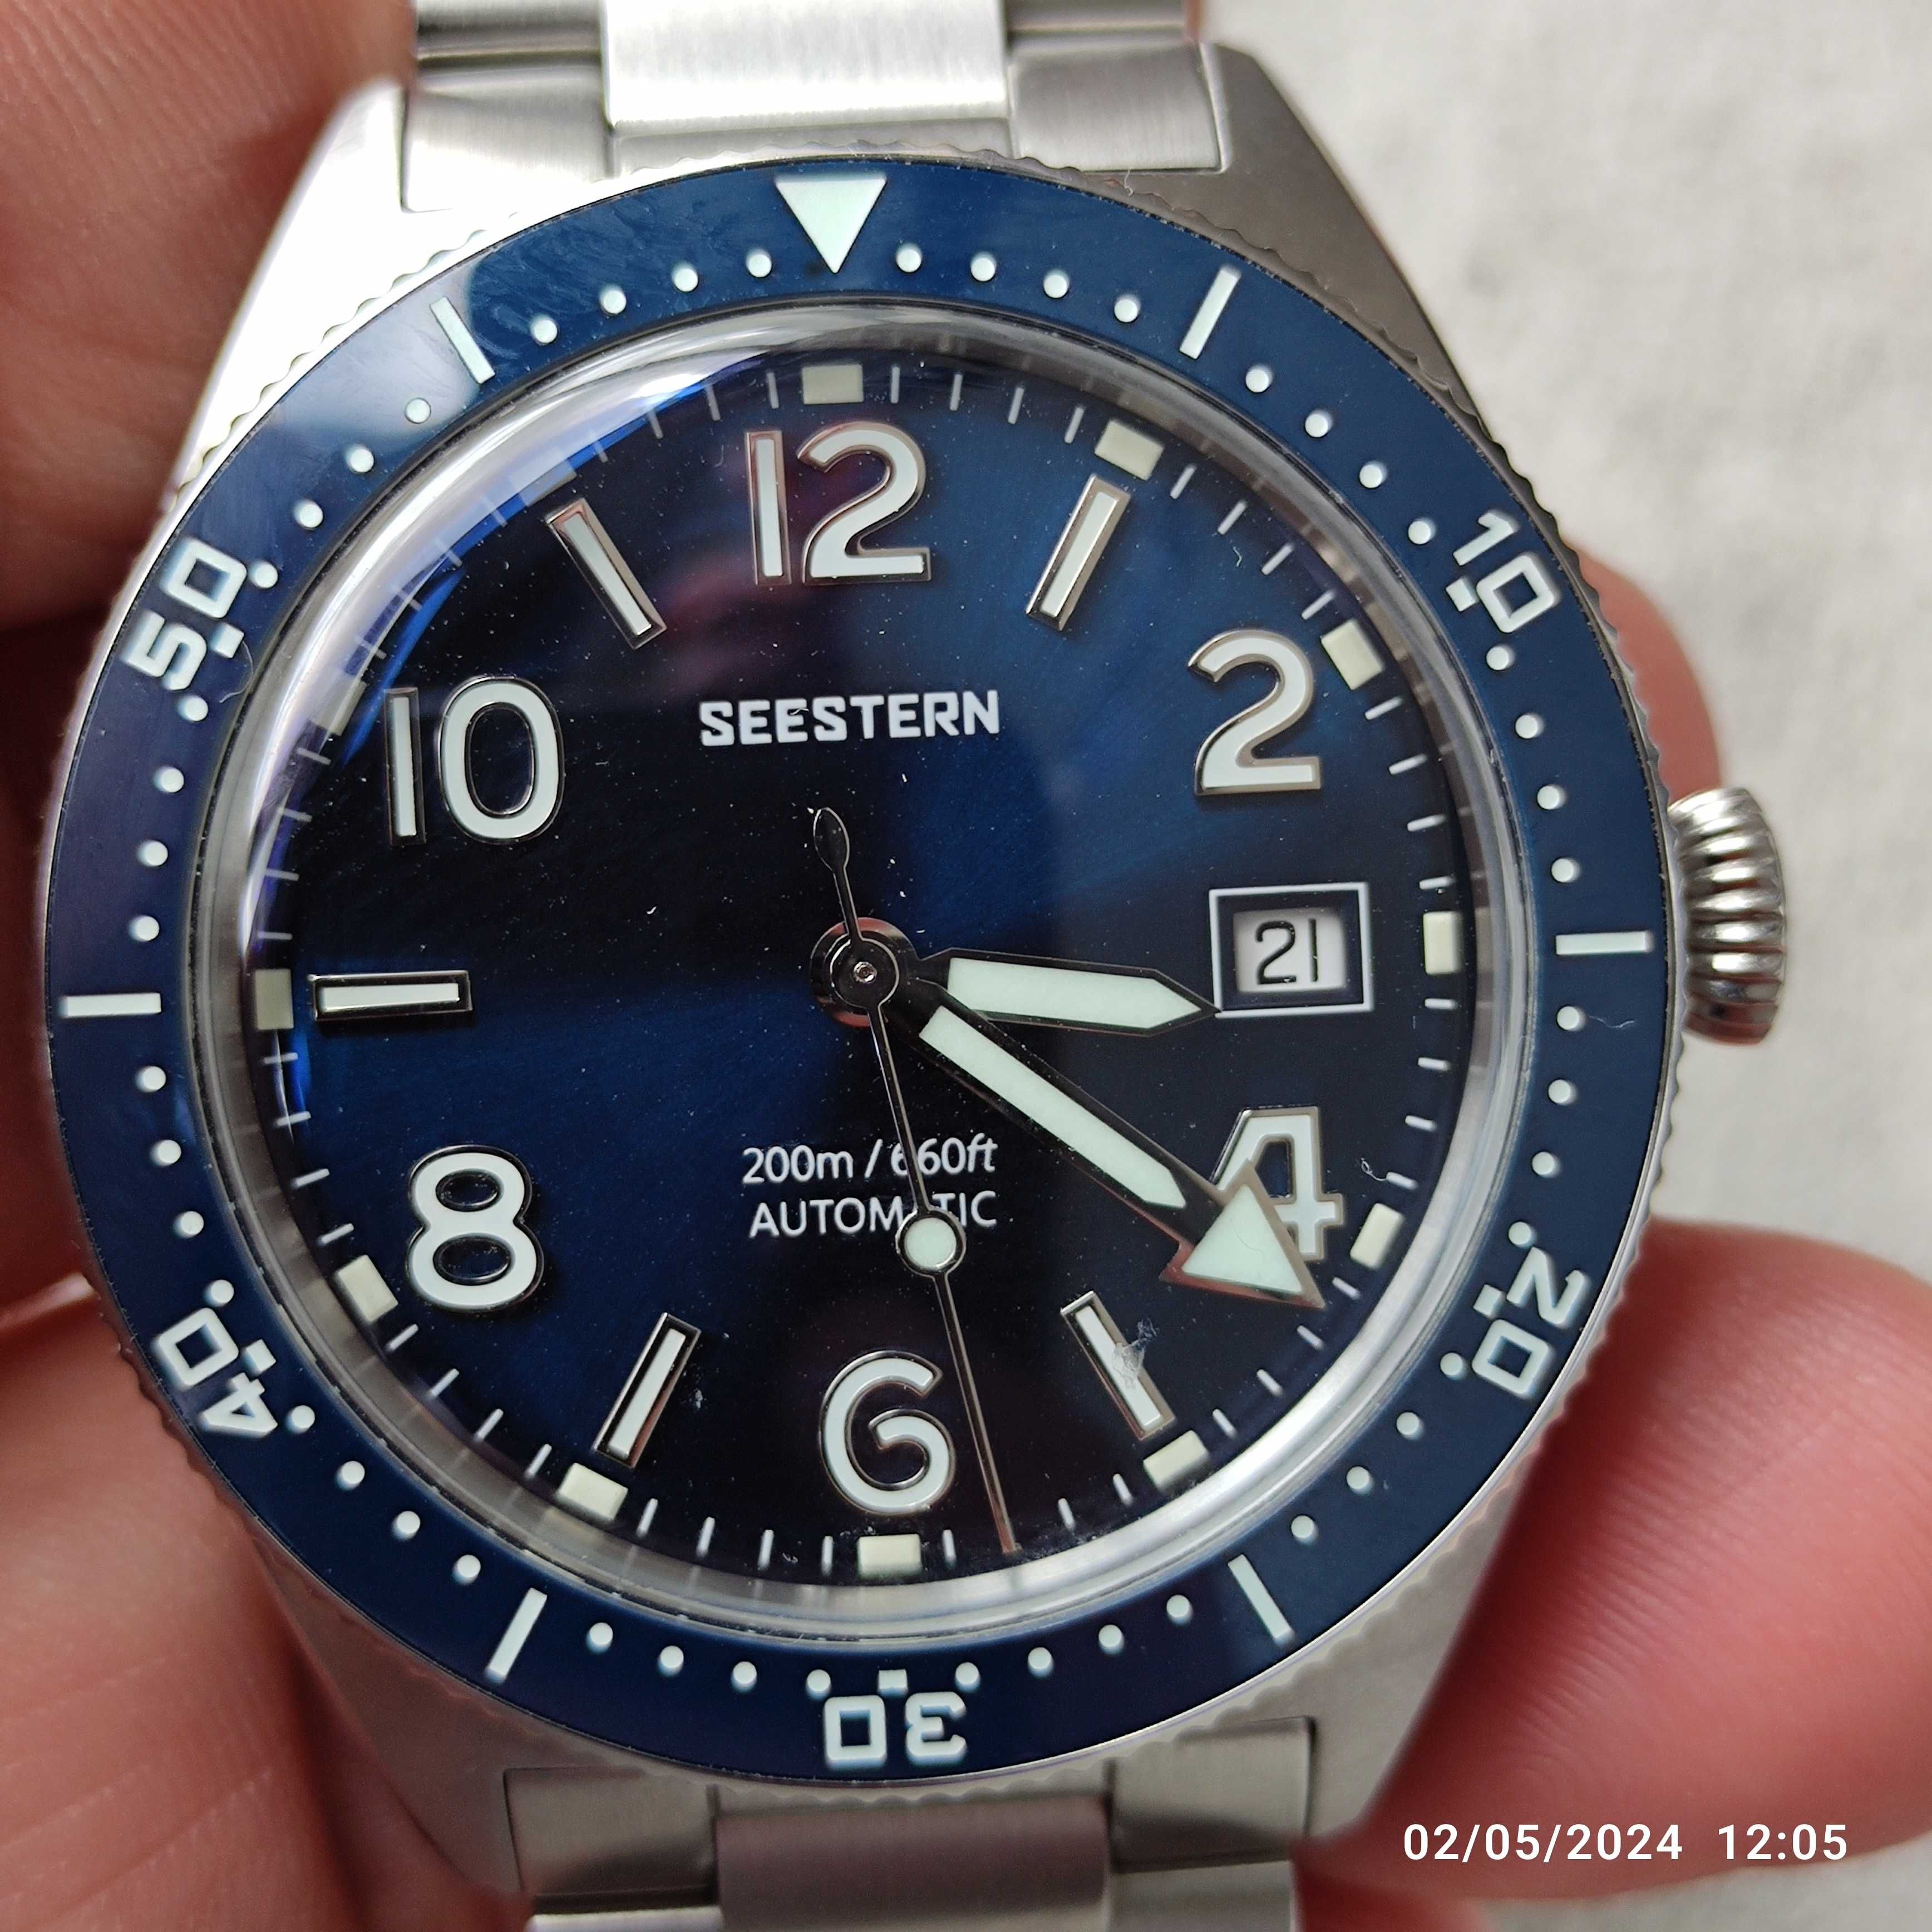 Seestern S435 Professional Diver